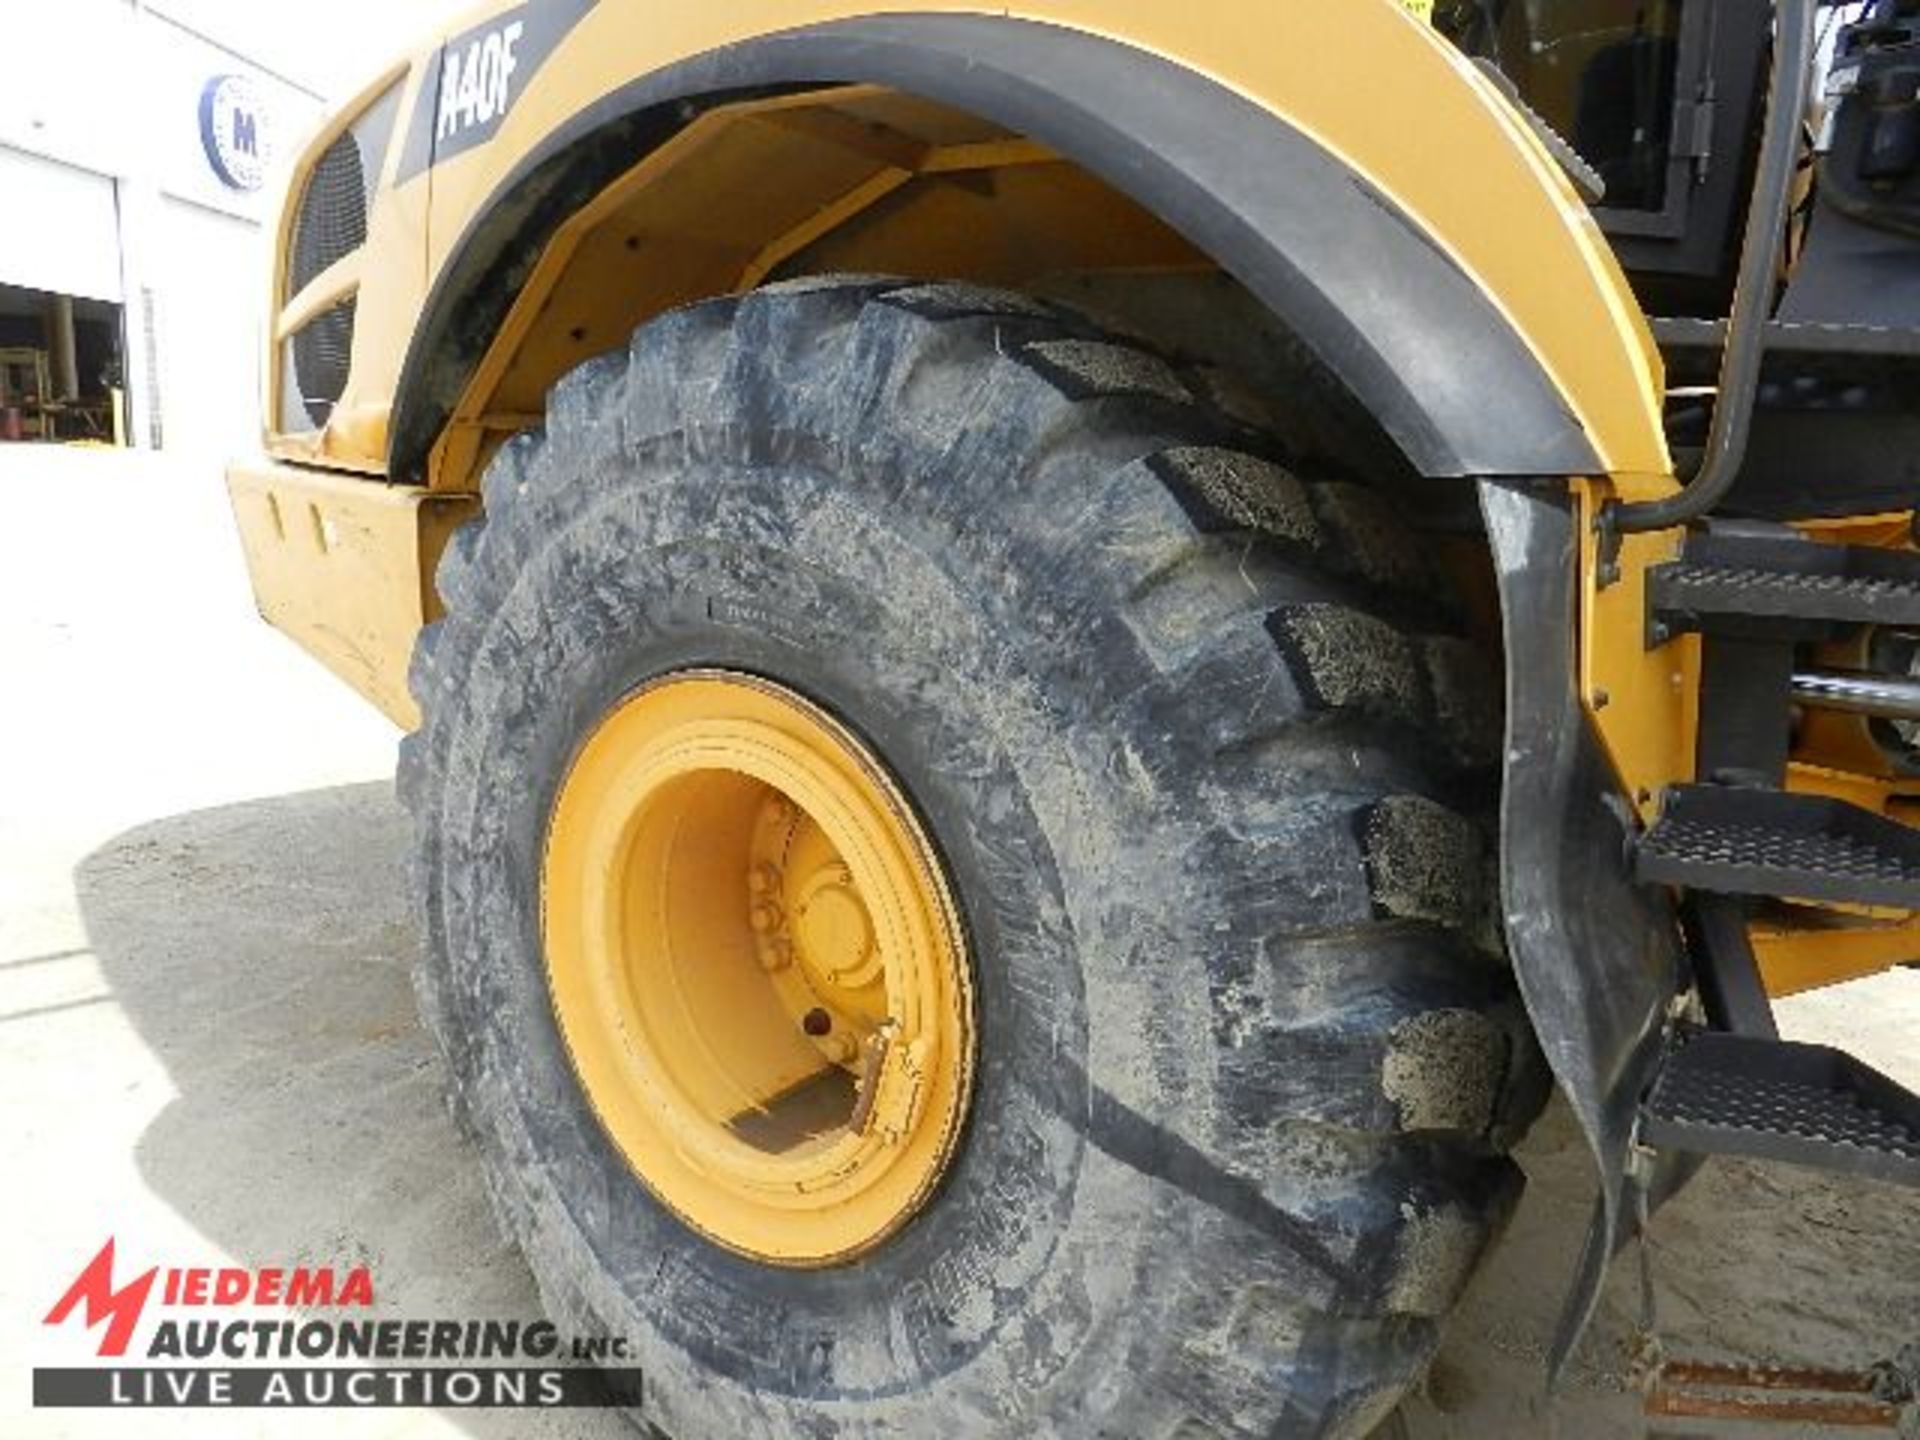 2012 VOLVO A40F ARTICULATED OFF ROAD DUMP TRUCK, 2,286 HOURS SHOWING, WITH TAILGATE, HEATED BOX, - Image 13 of 18